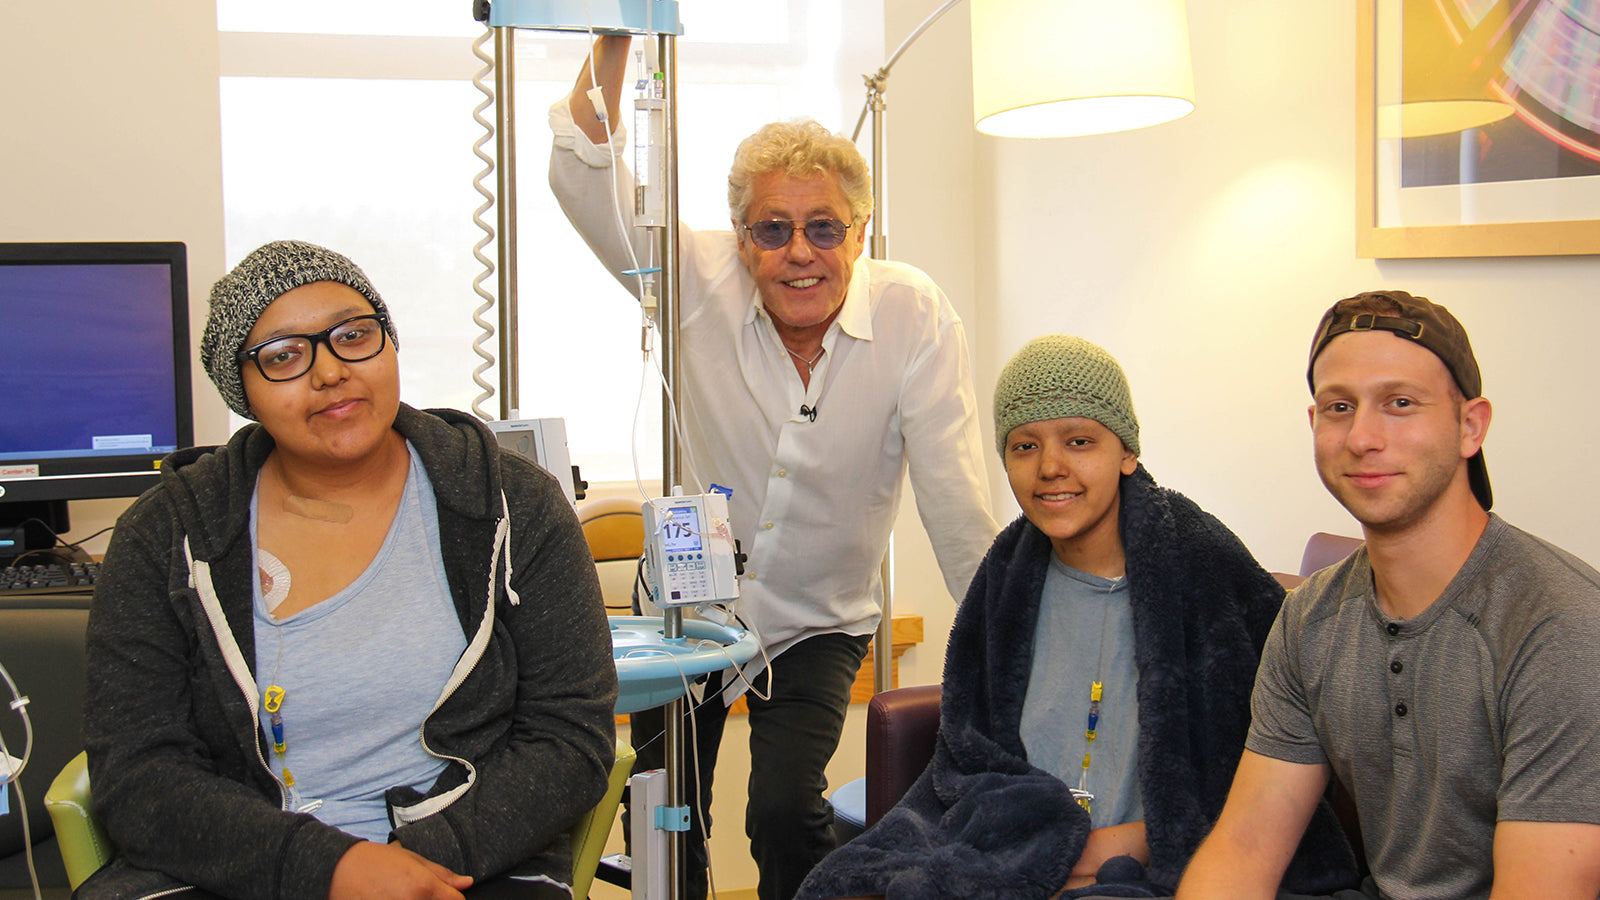 Roger Daltrey of The Who smiles with three teenage cancer patients